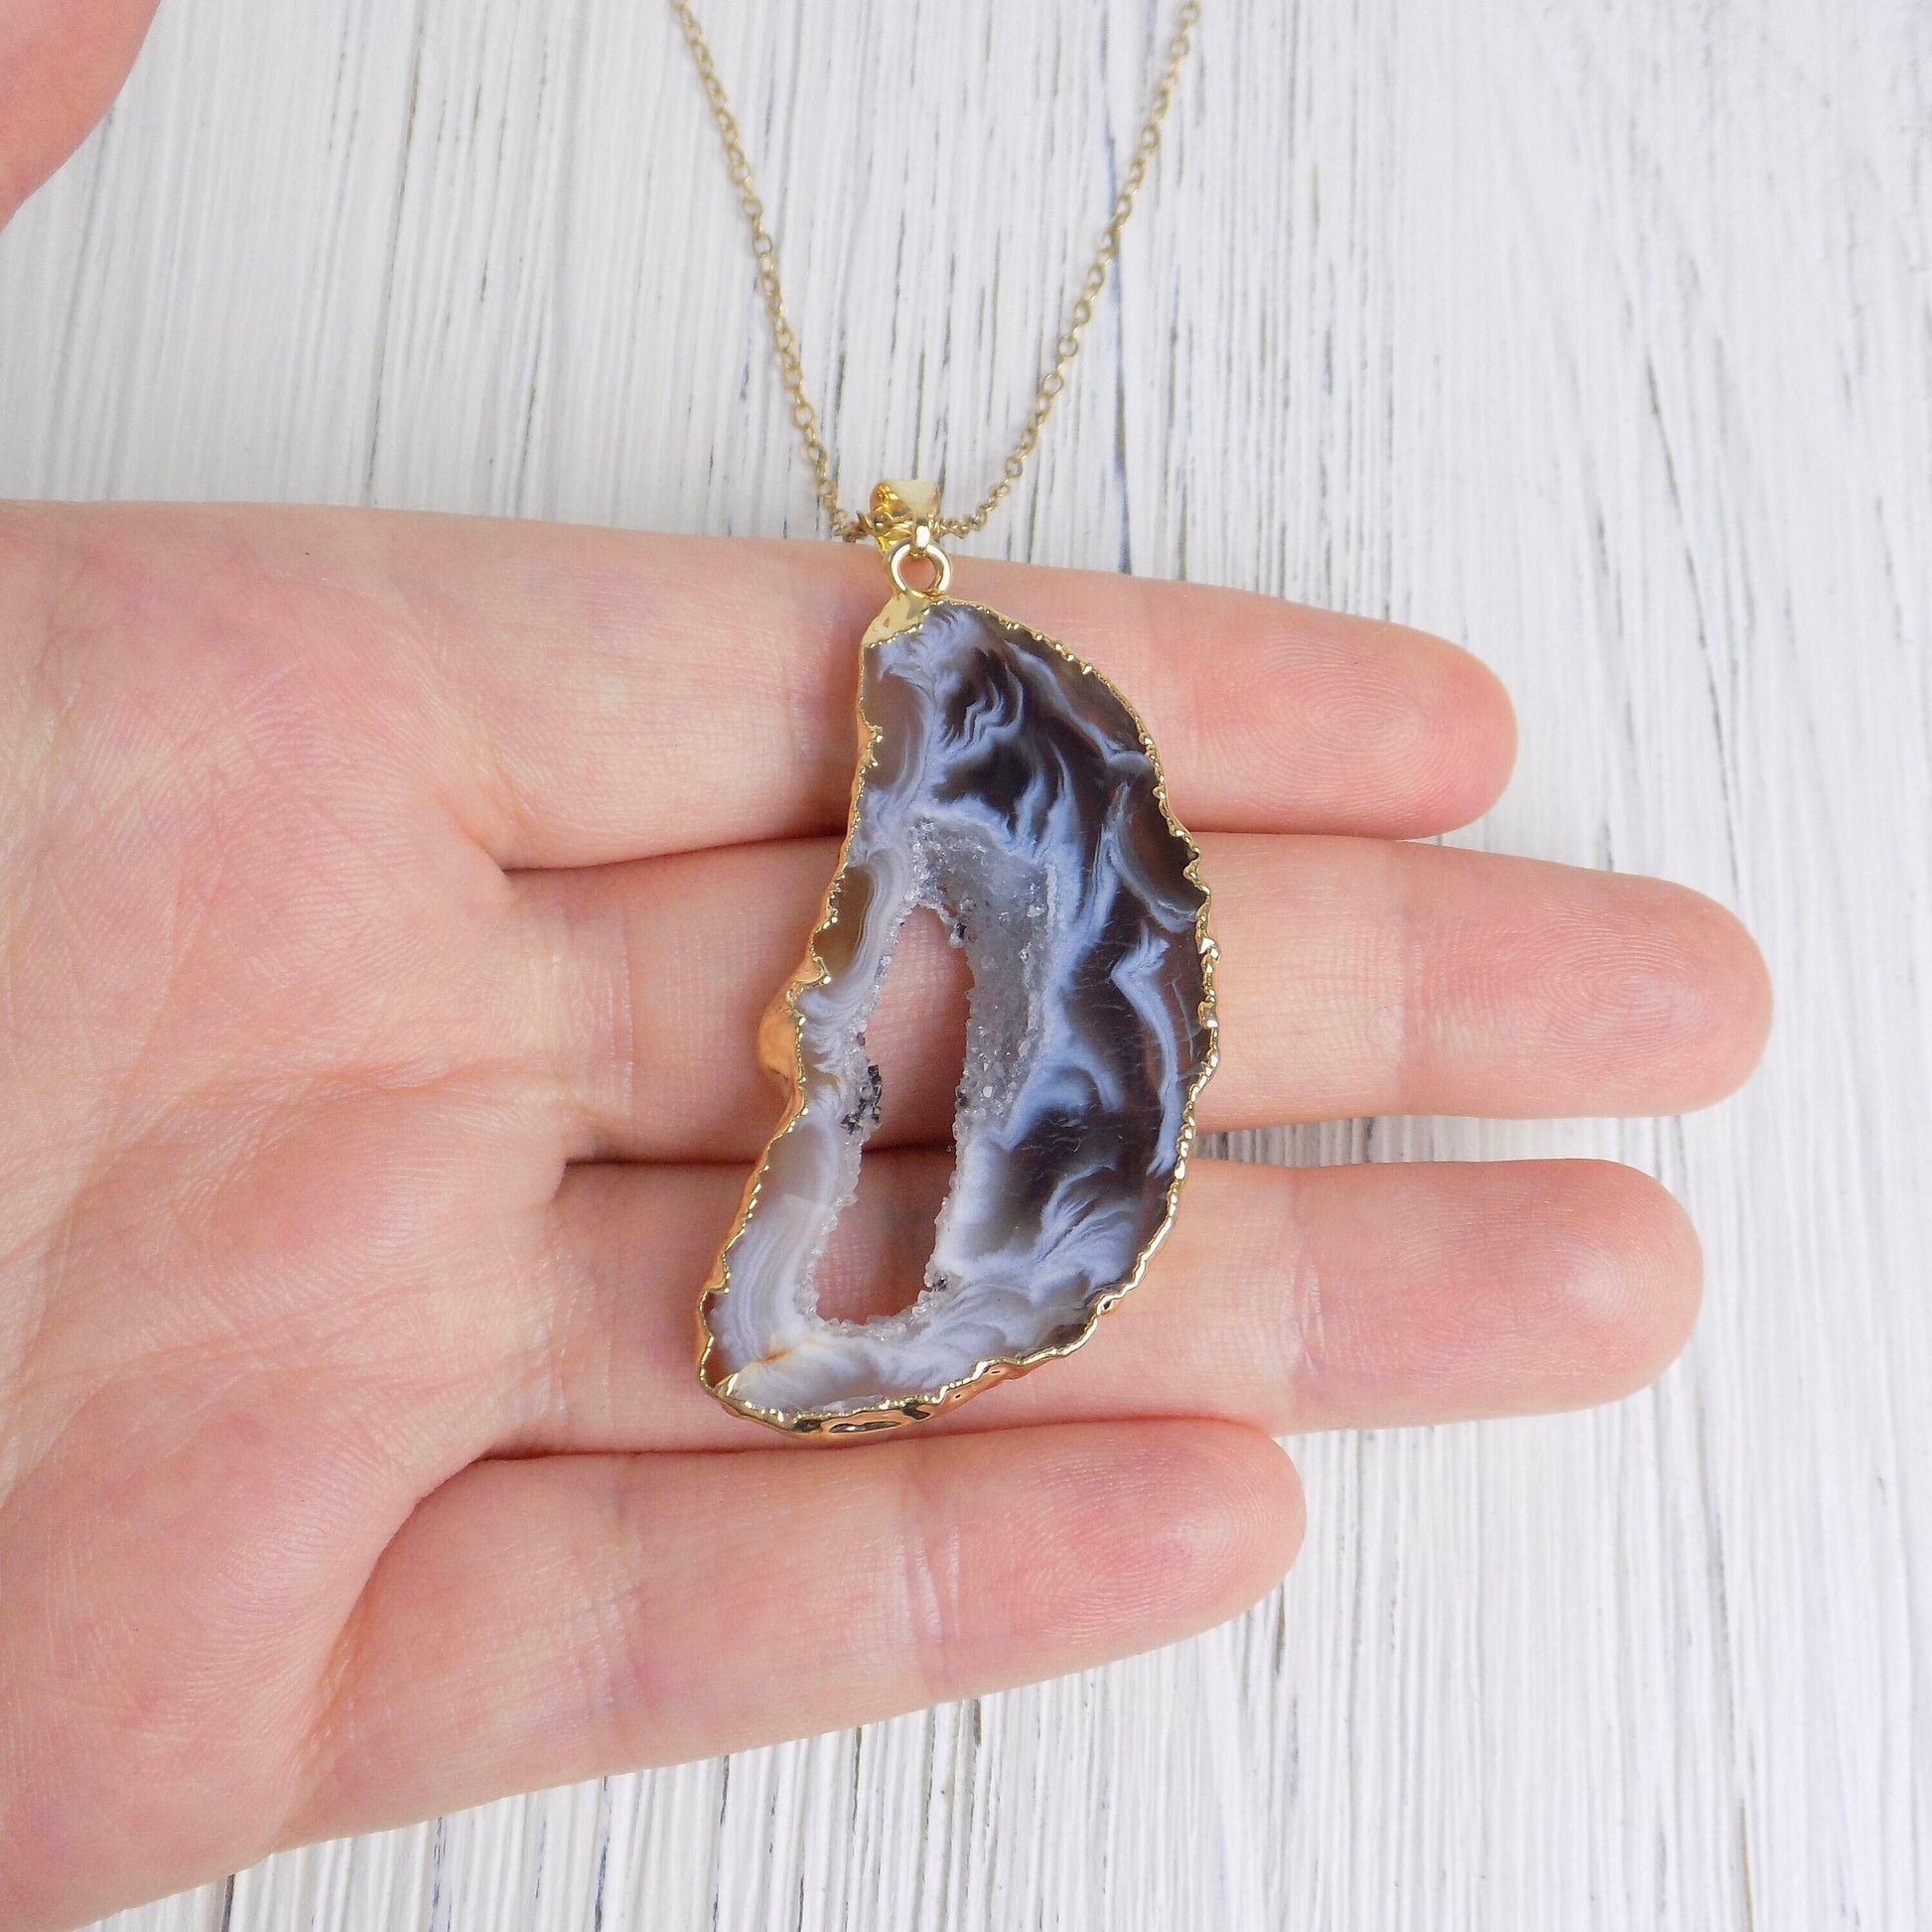 Gray Geode Necklace in Gold - Stylish Gemstone Necklace for Layering